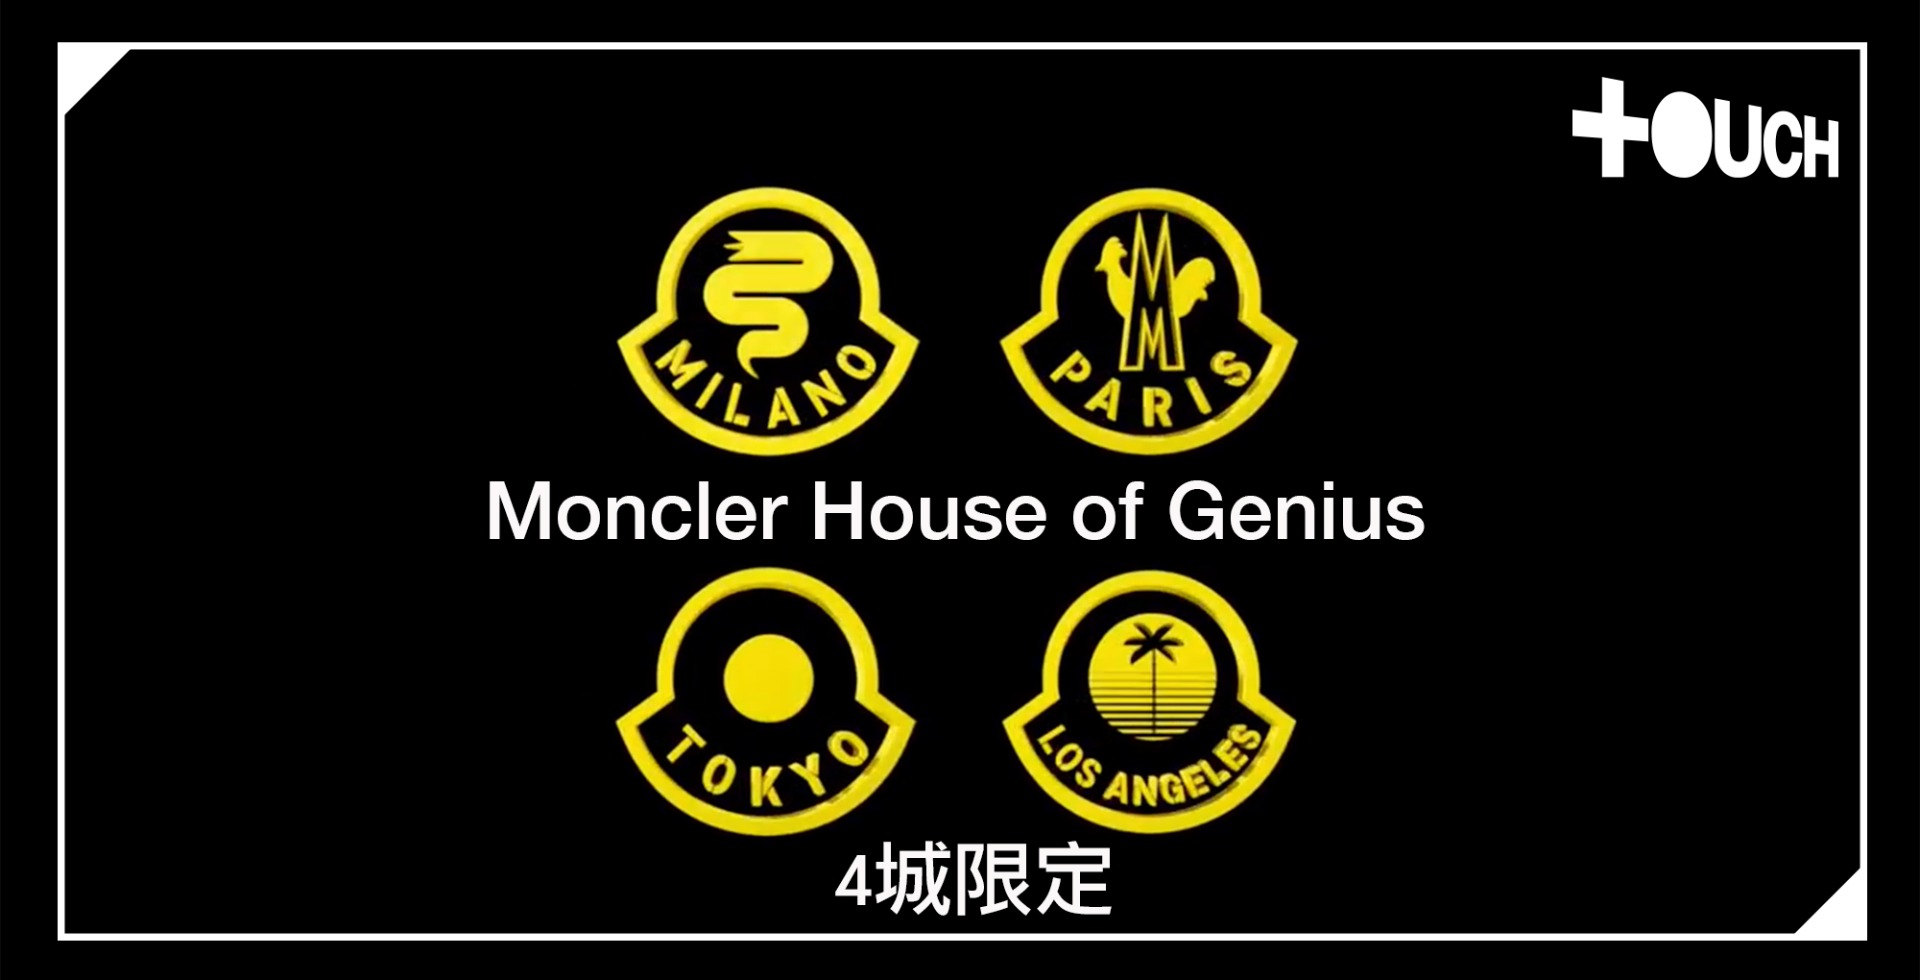 EAST TOUCH - BOYS - Moncler House of Genius．4城限定